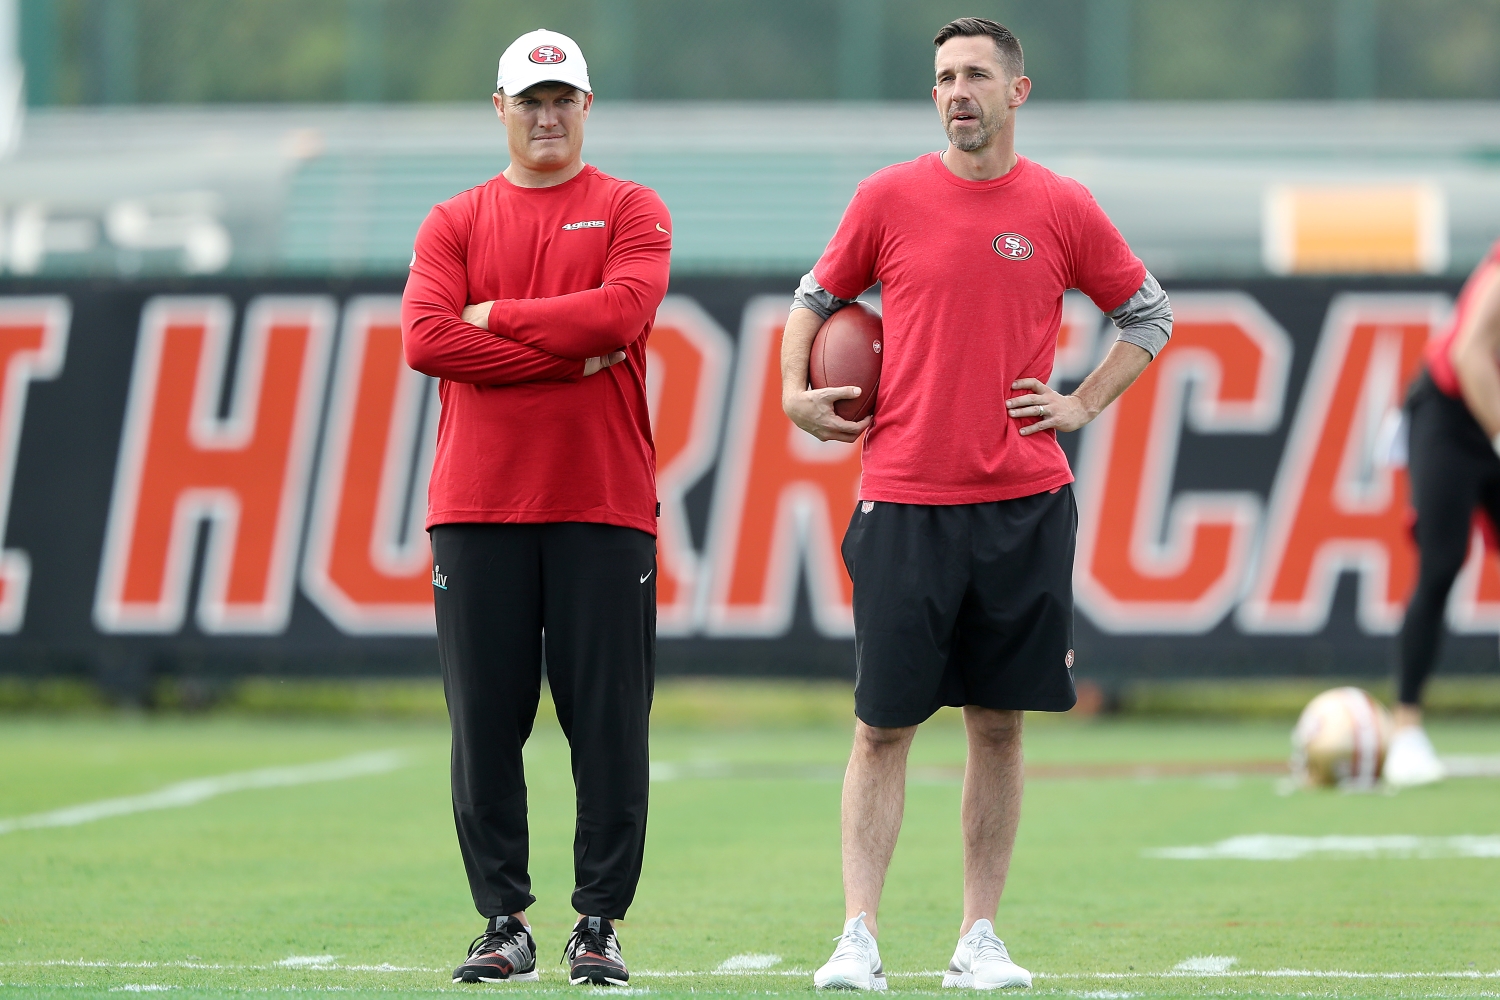 San Francisco 49ers general manager and former NFL star John Lynch stands next to head coach Kyle Shanahan.